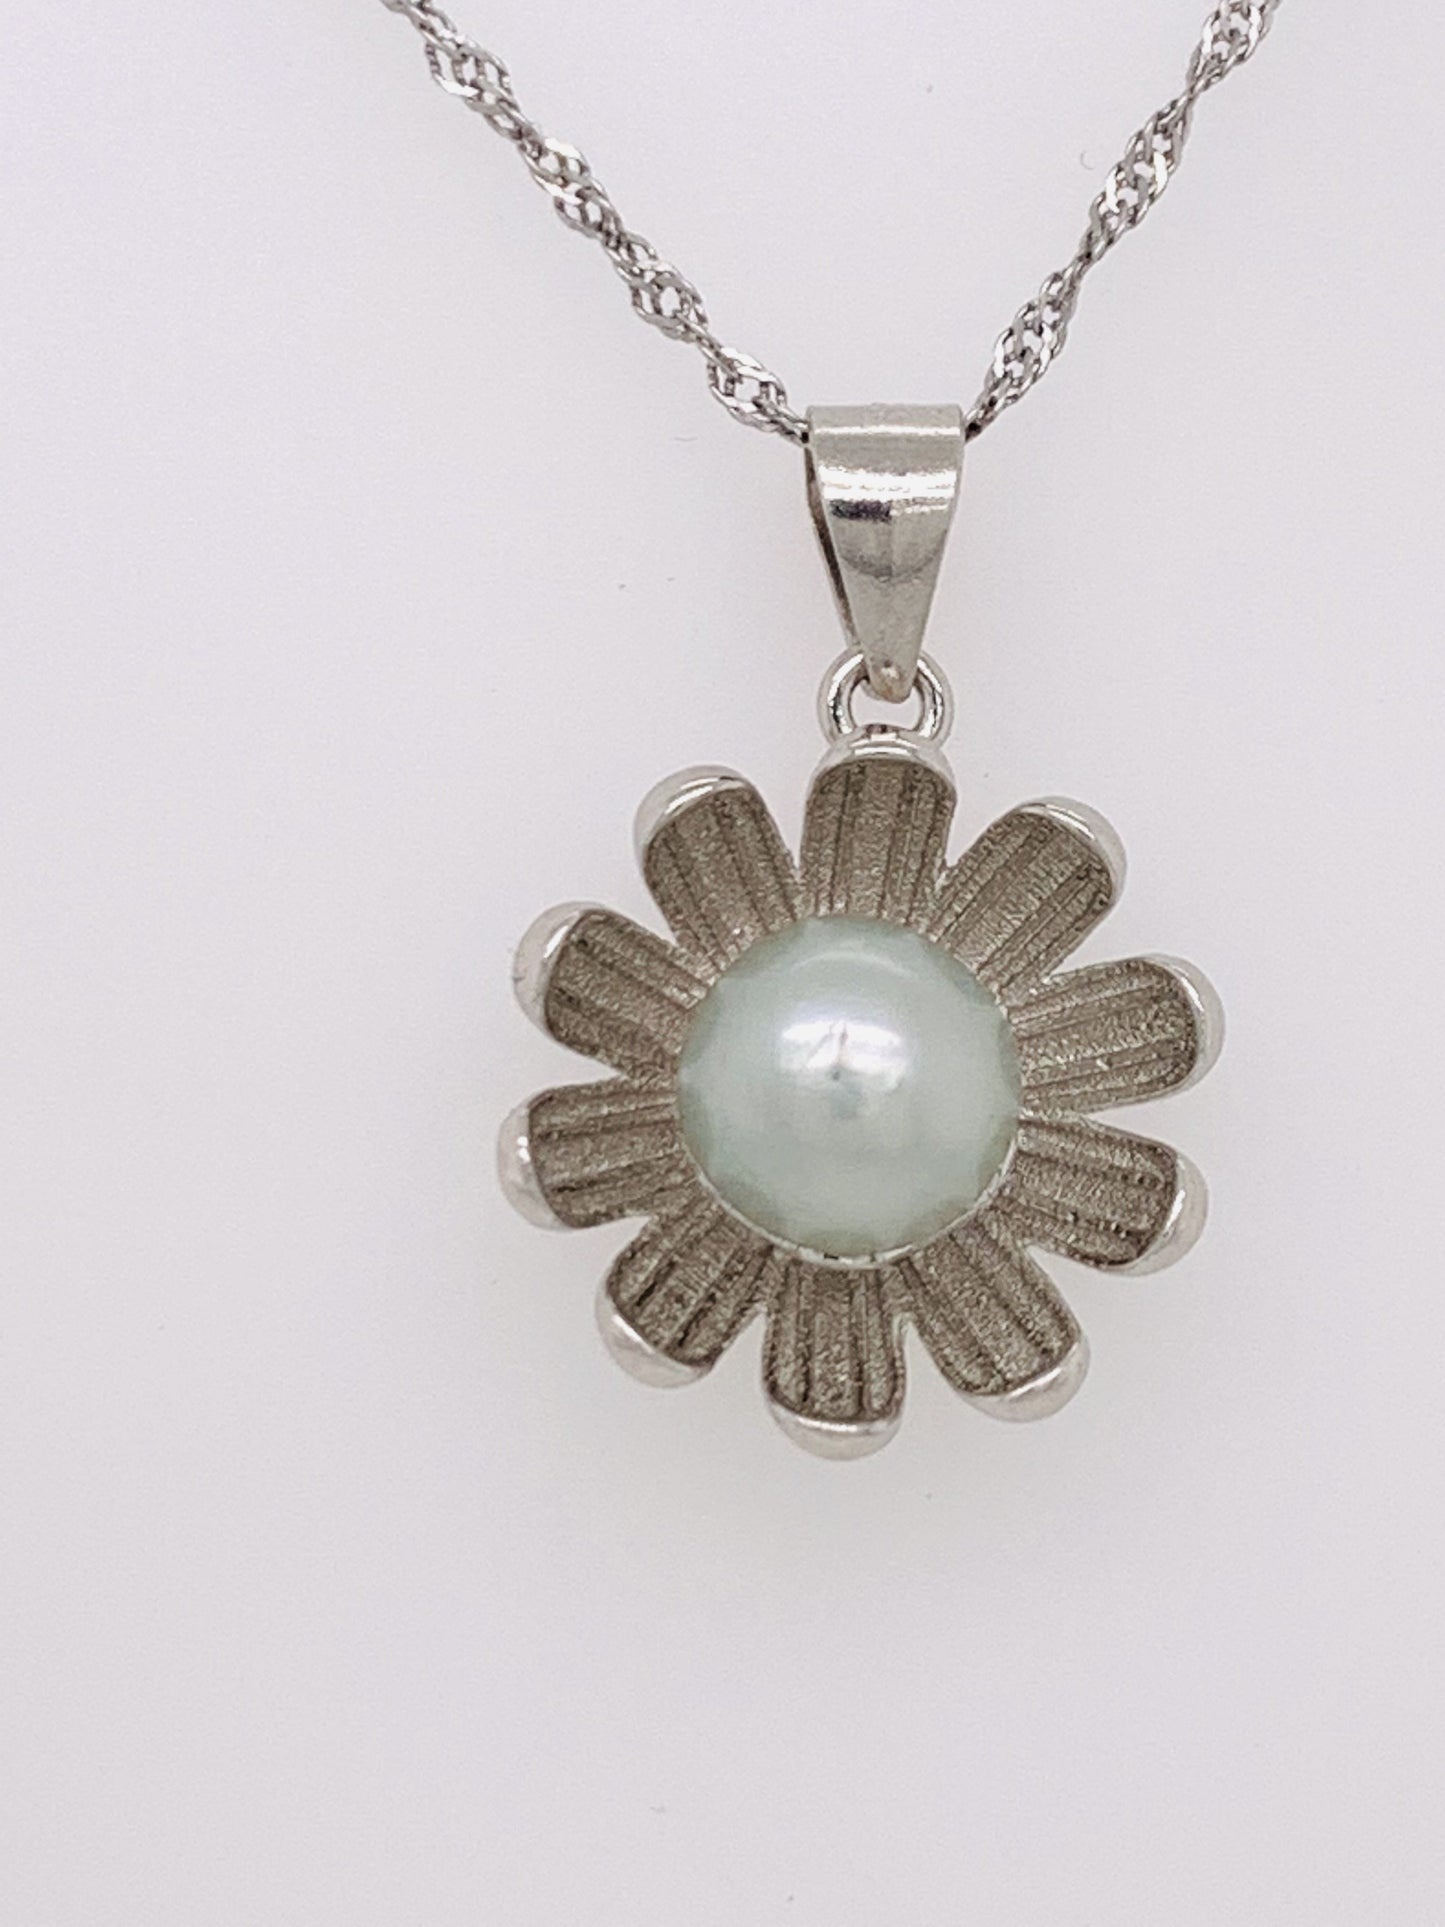 Amazon.com: Water Lily Necklace Lotus Charm Pendant Silver Lily Pad Blossom  : Handmade Products